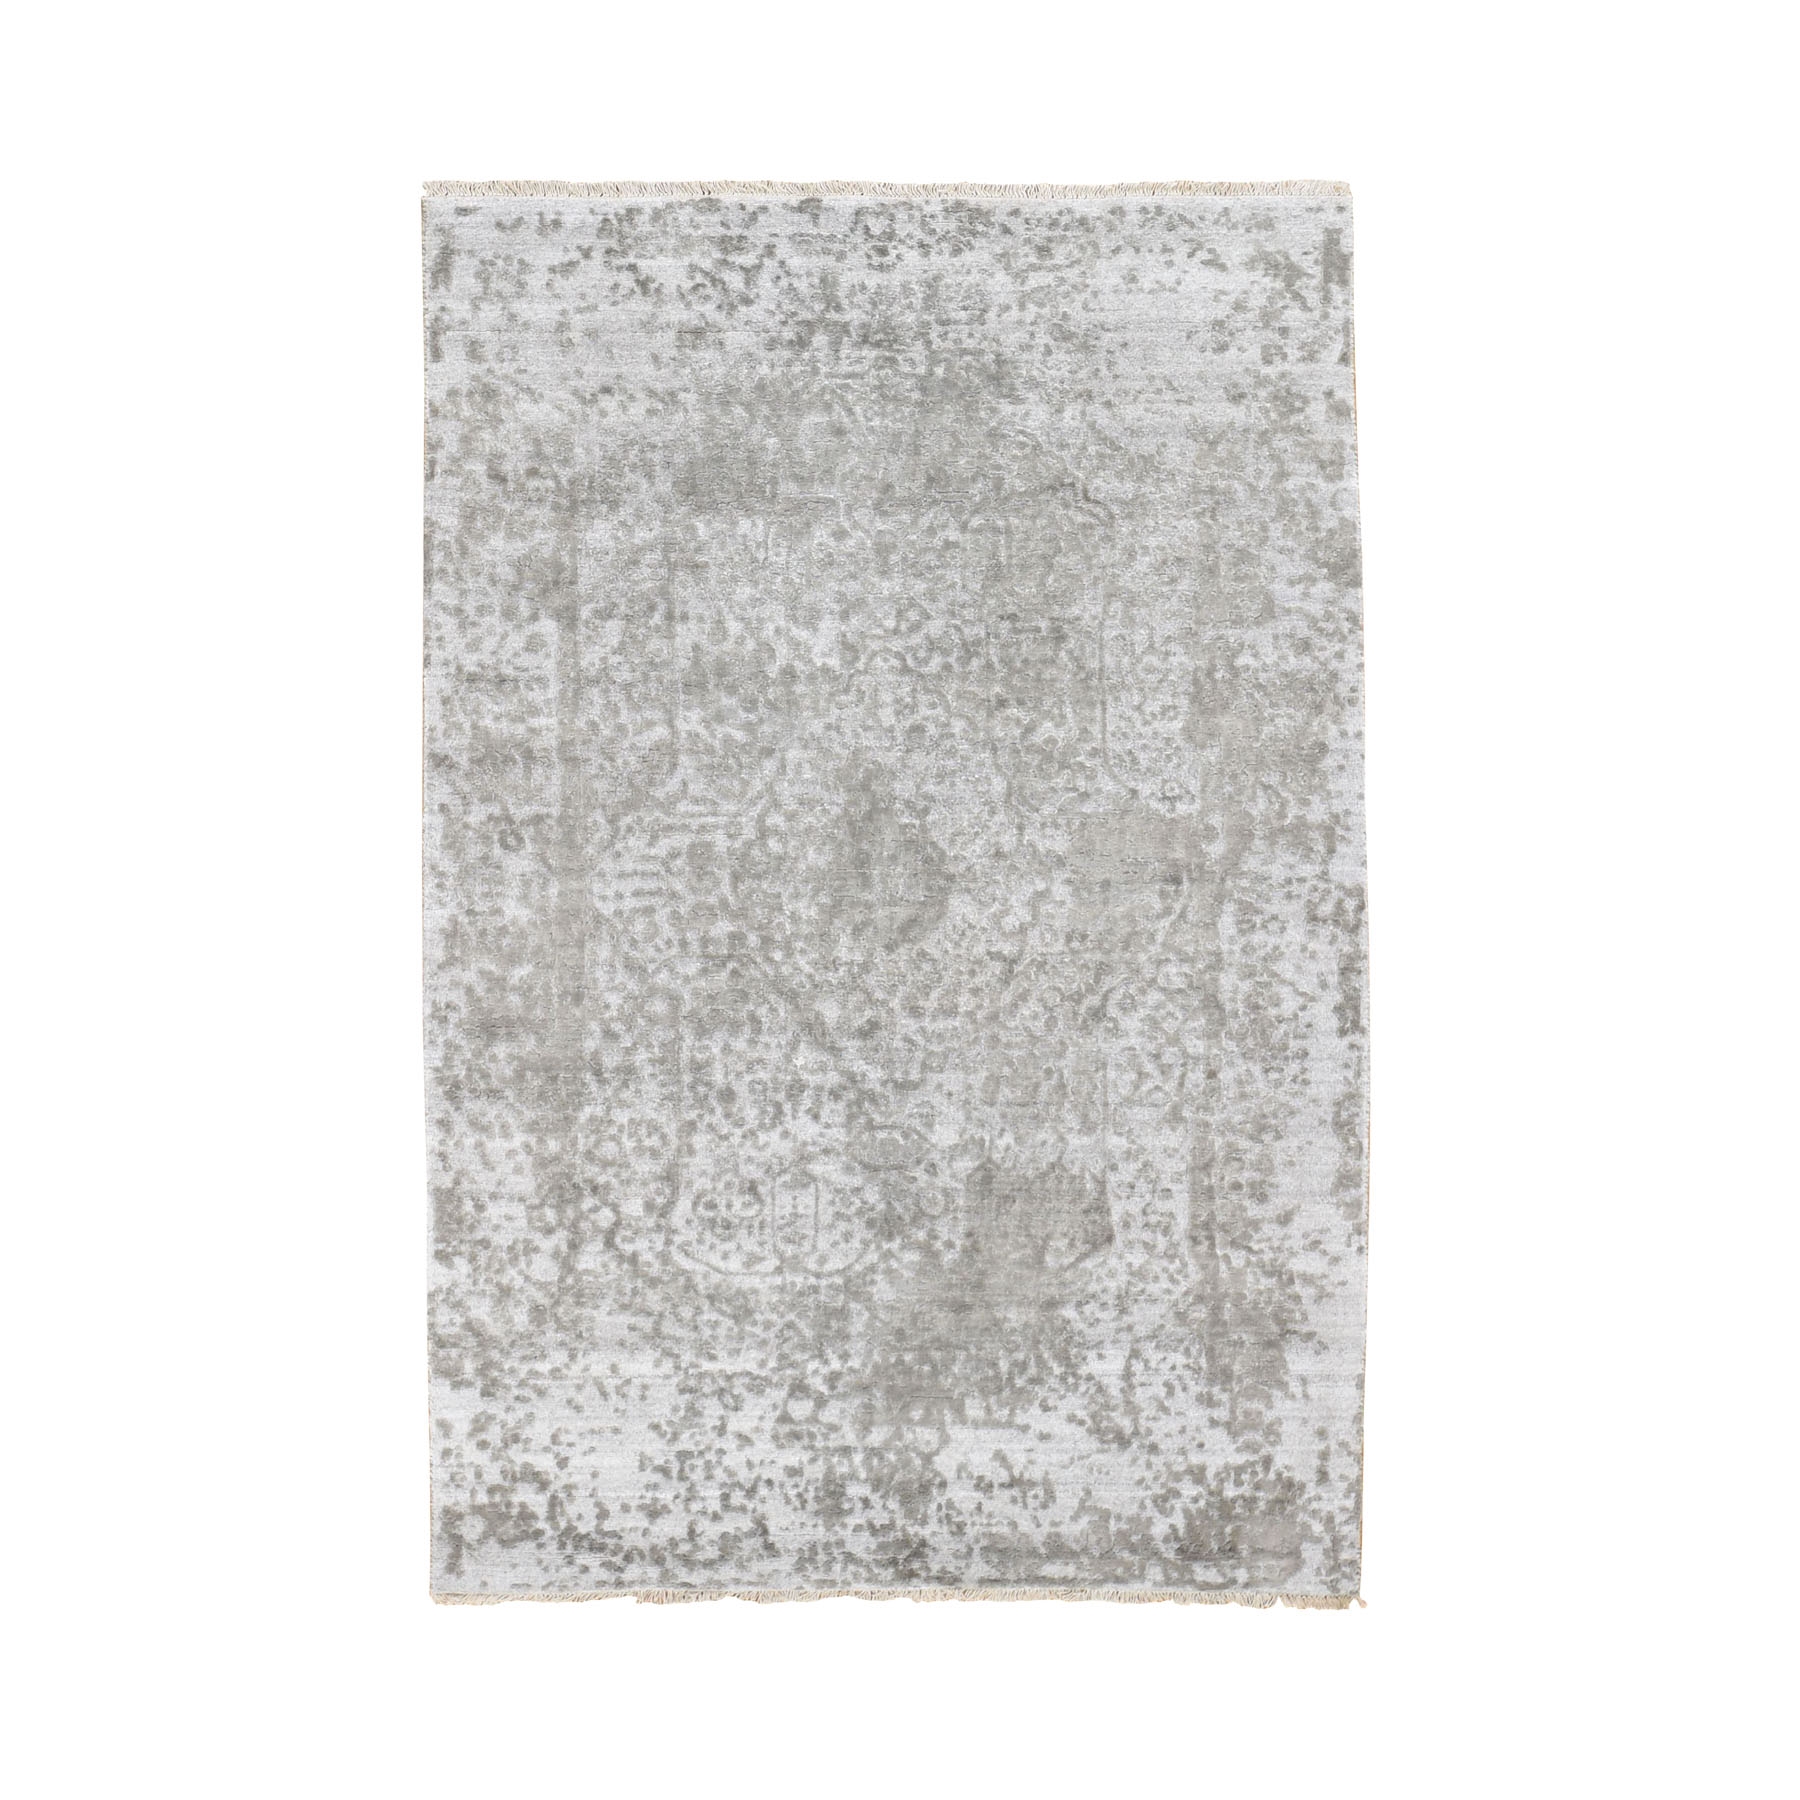 4-x6- Silver-Dark Gray Erased Persian Design Wool and Pure Silk Hand Knotted Oriental Rug 